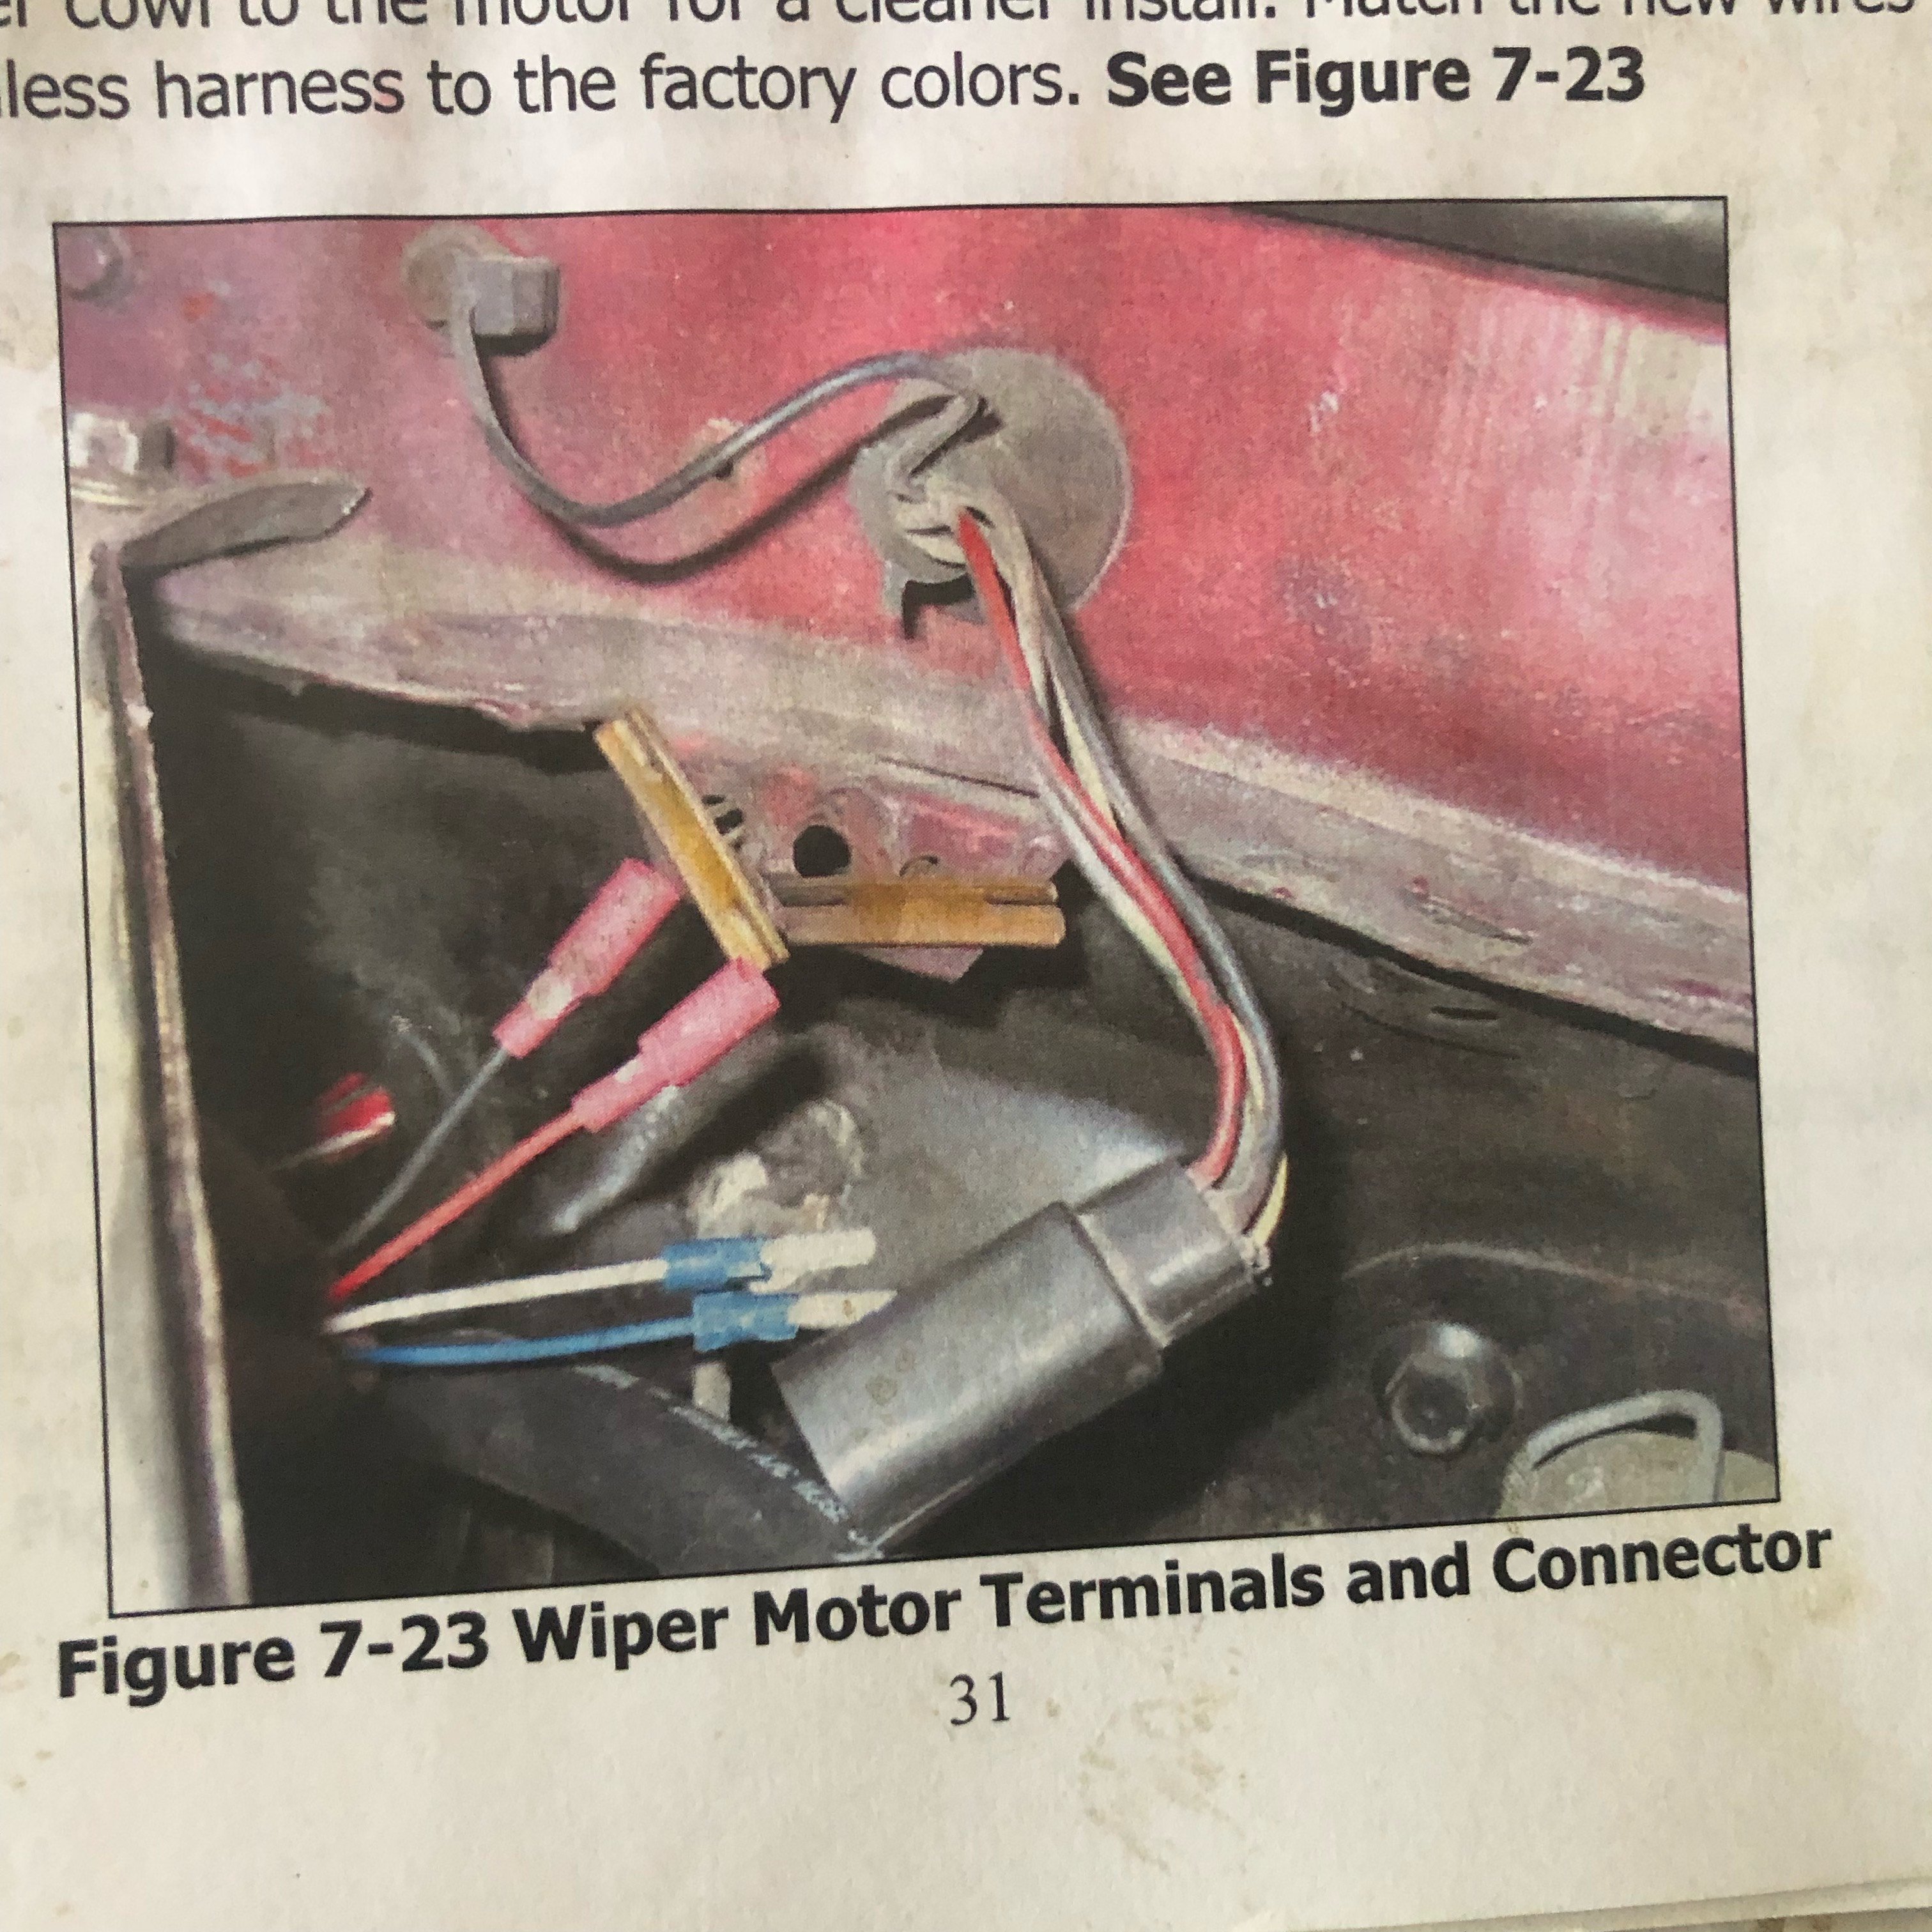 Wiper Motor/Painless Wiring - 1969-70 Technical Forum - 69stang.com and